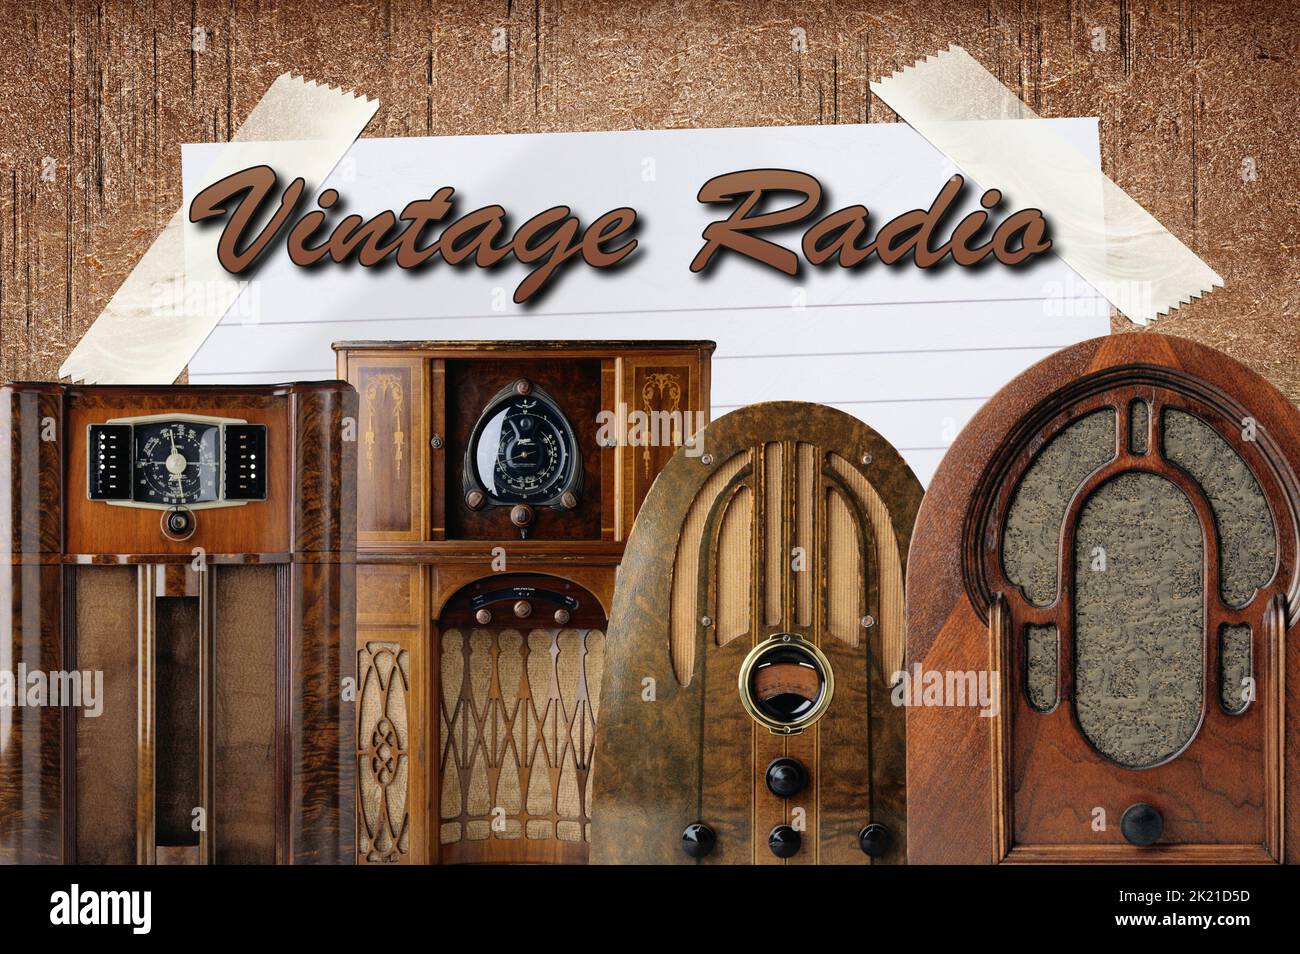 A collection of vintage radios Stock Photo